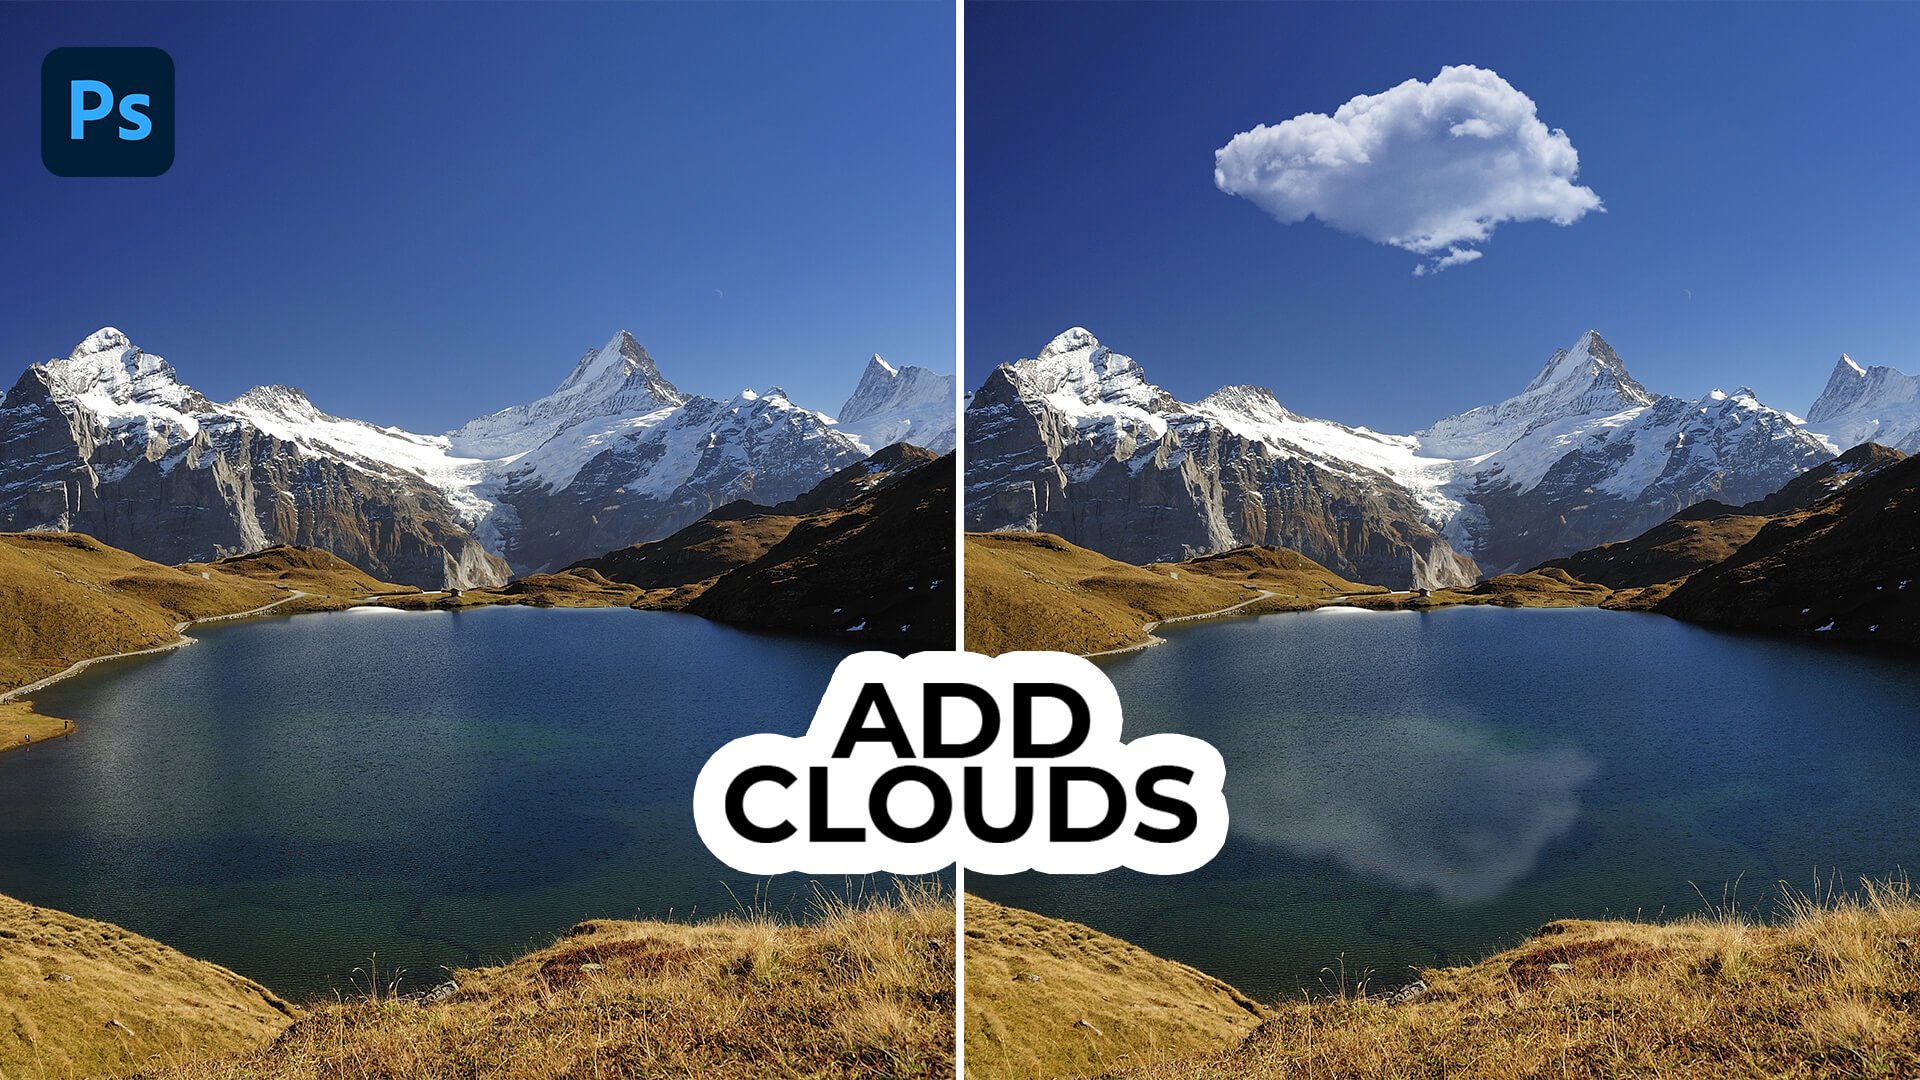 How to Add Clouds in Photoshop